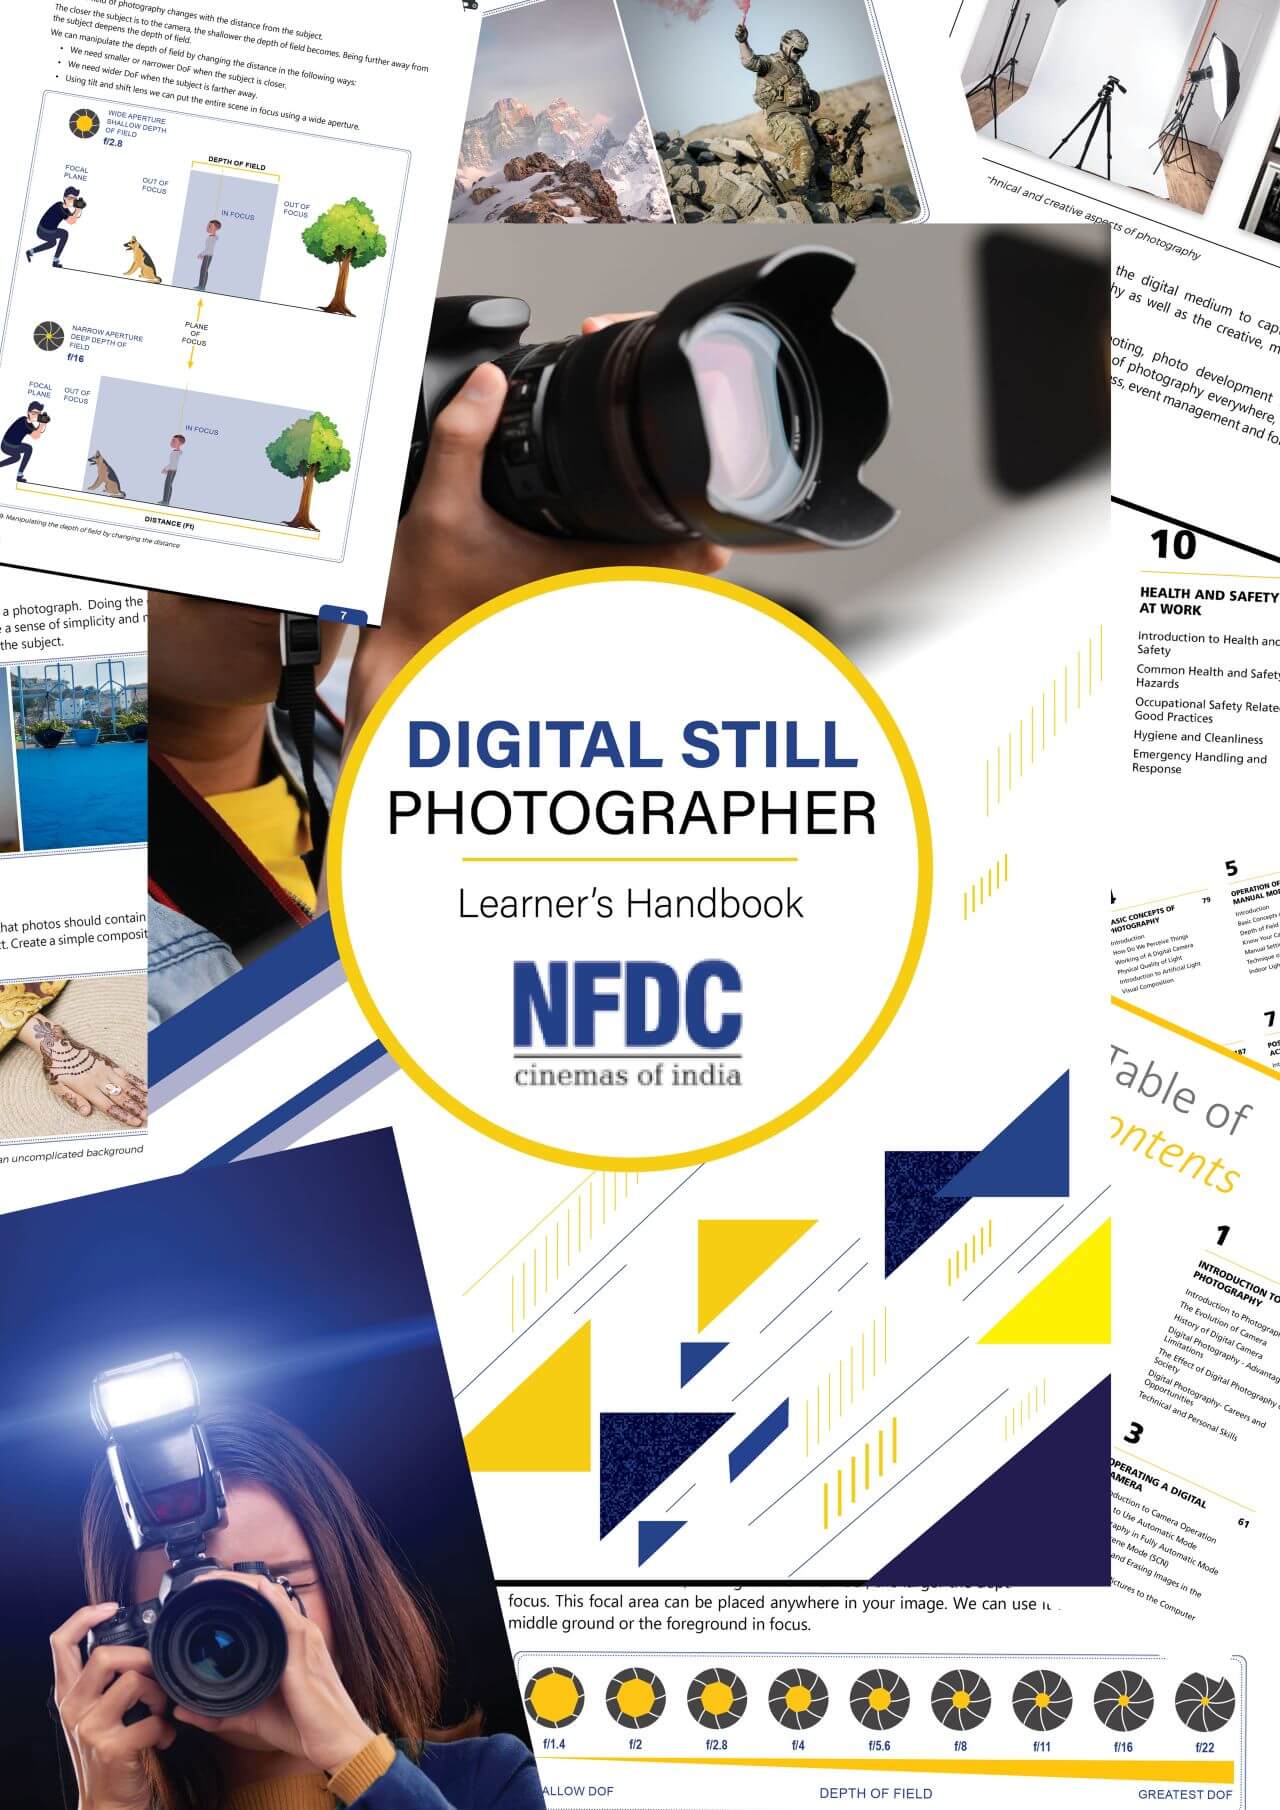 Launch of Digital Still Photographer Course Materials for NFDC